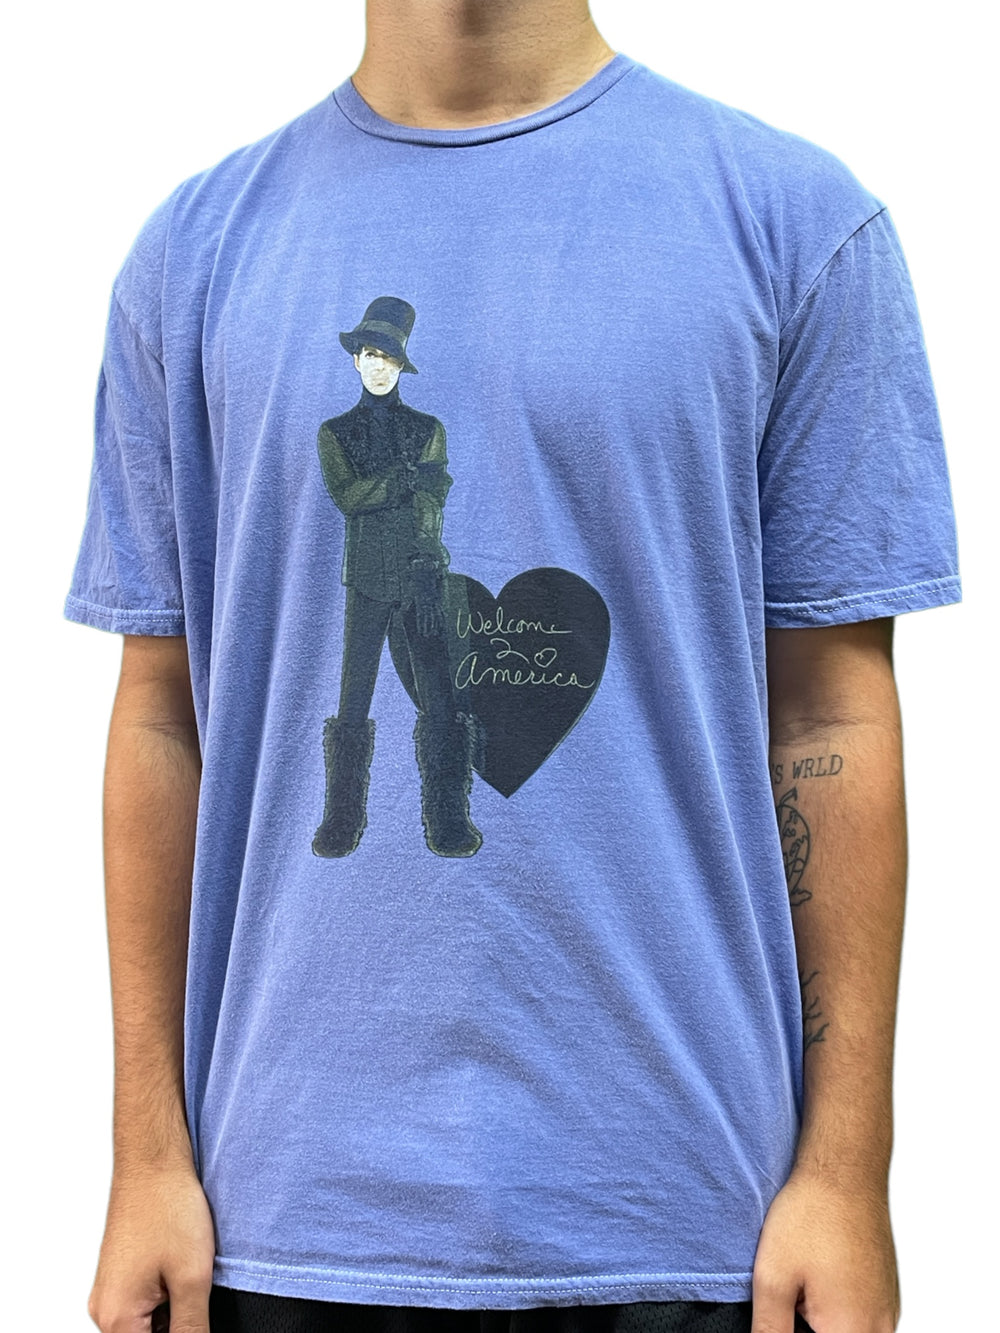 Prince – Welcome 2 America Heart Unisex Official Unisex T Shirt NEW